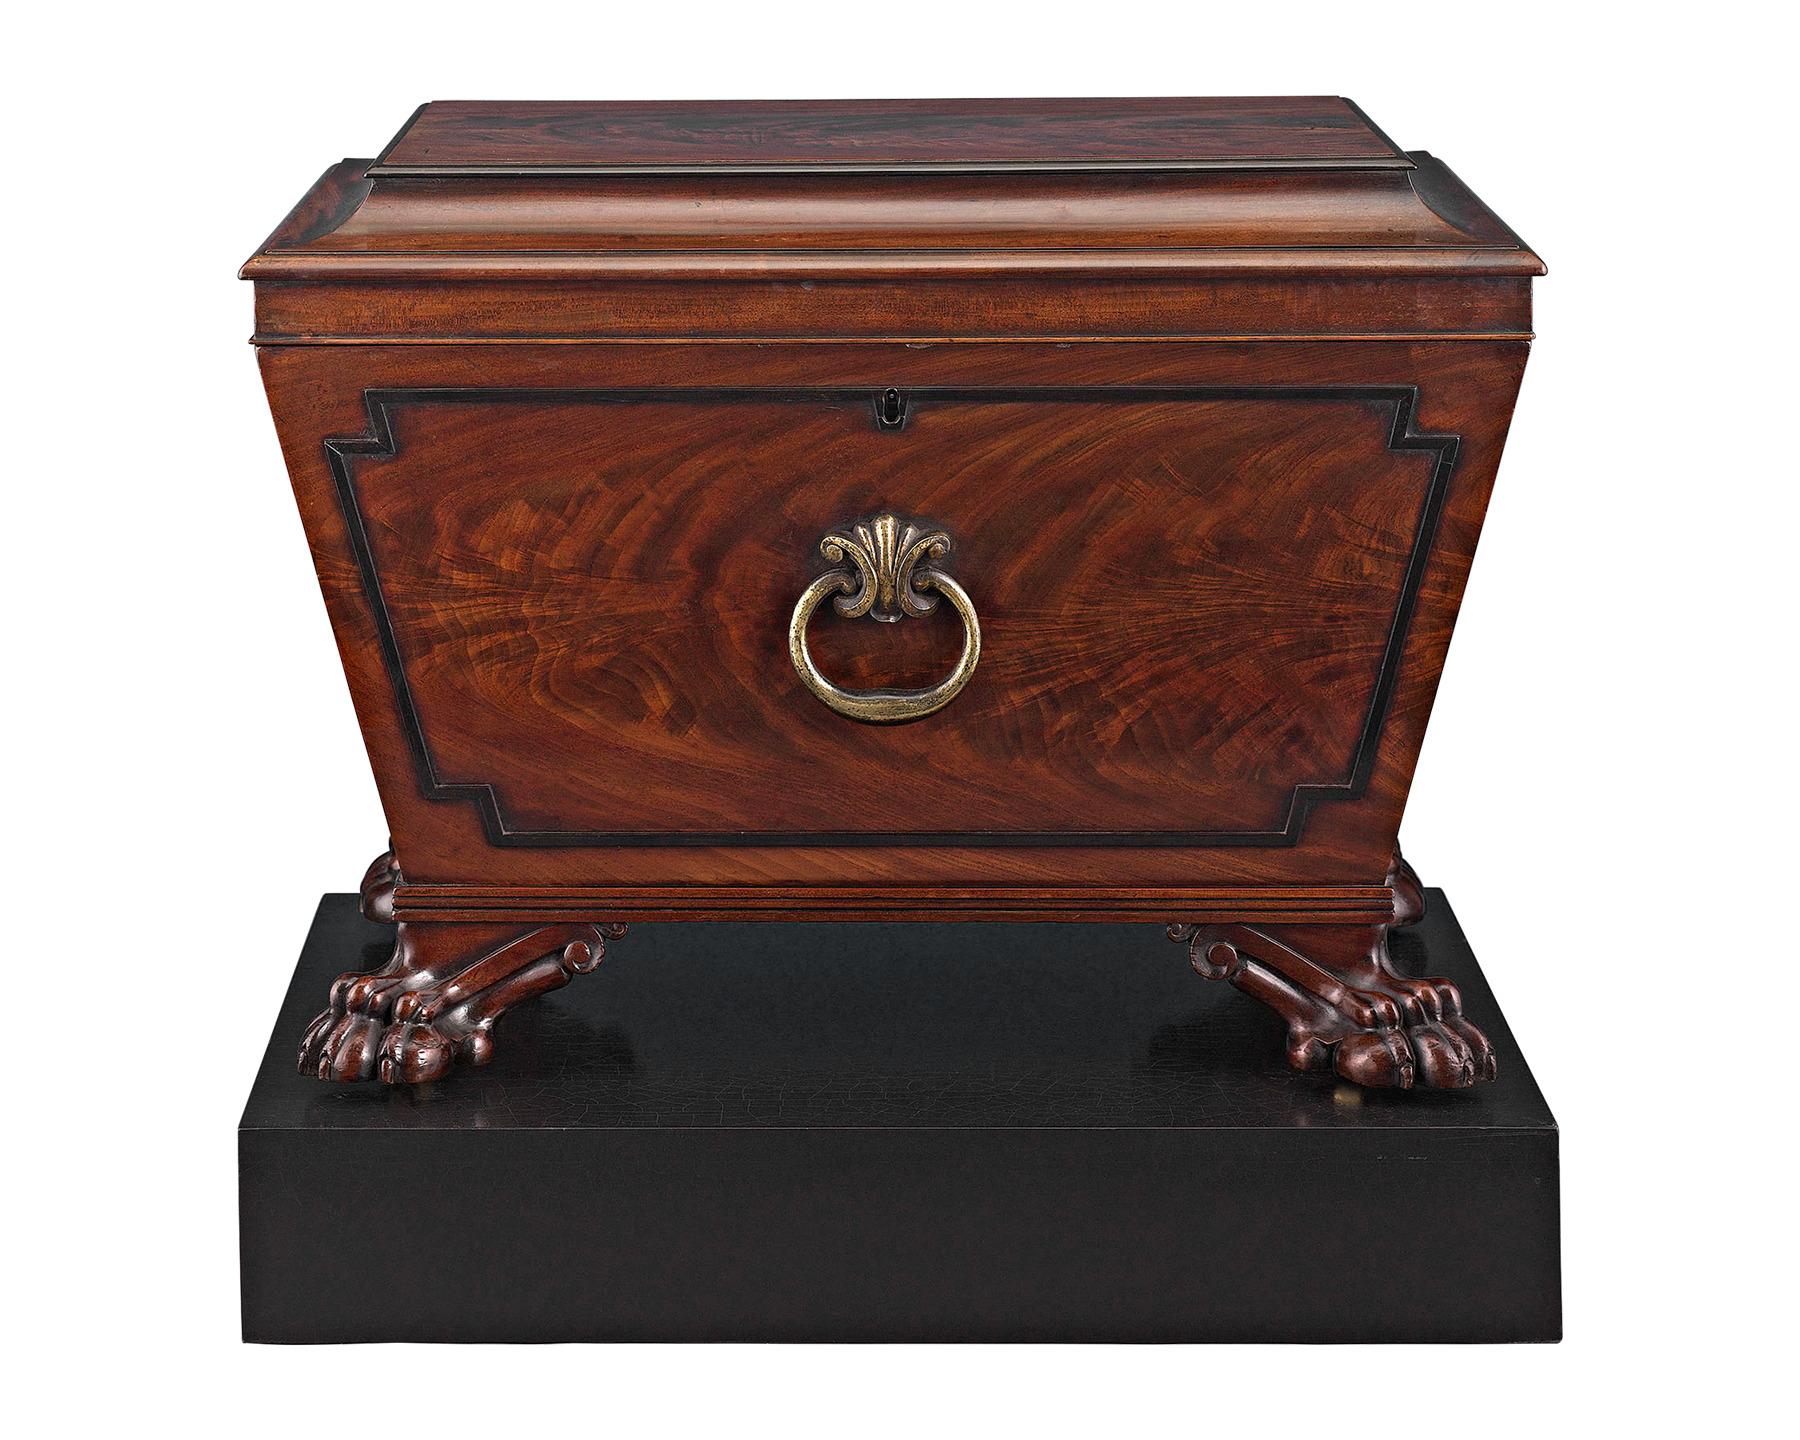 This refined Regency-period wine cellarette is crafted of rich mahogany and boasts beautifully carved details. The sarcophagus form is distinguished by ebonized accents and handsome lion paw feet. Complete with its original brass side handles and